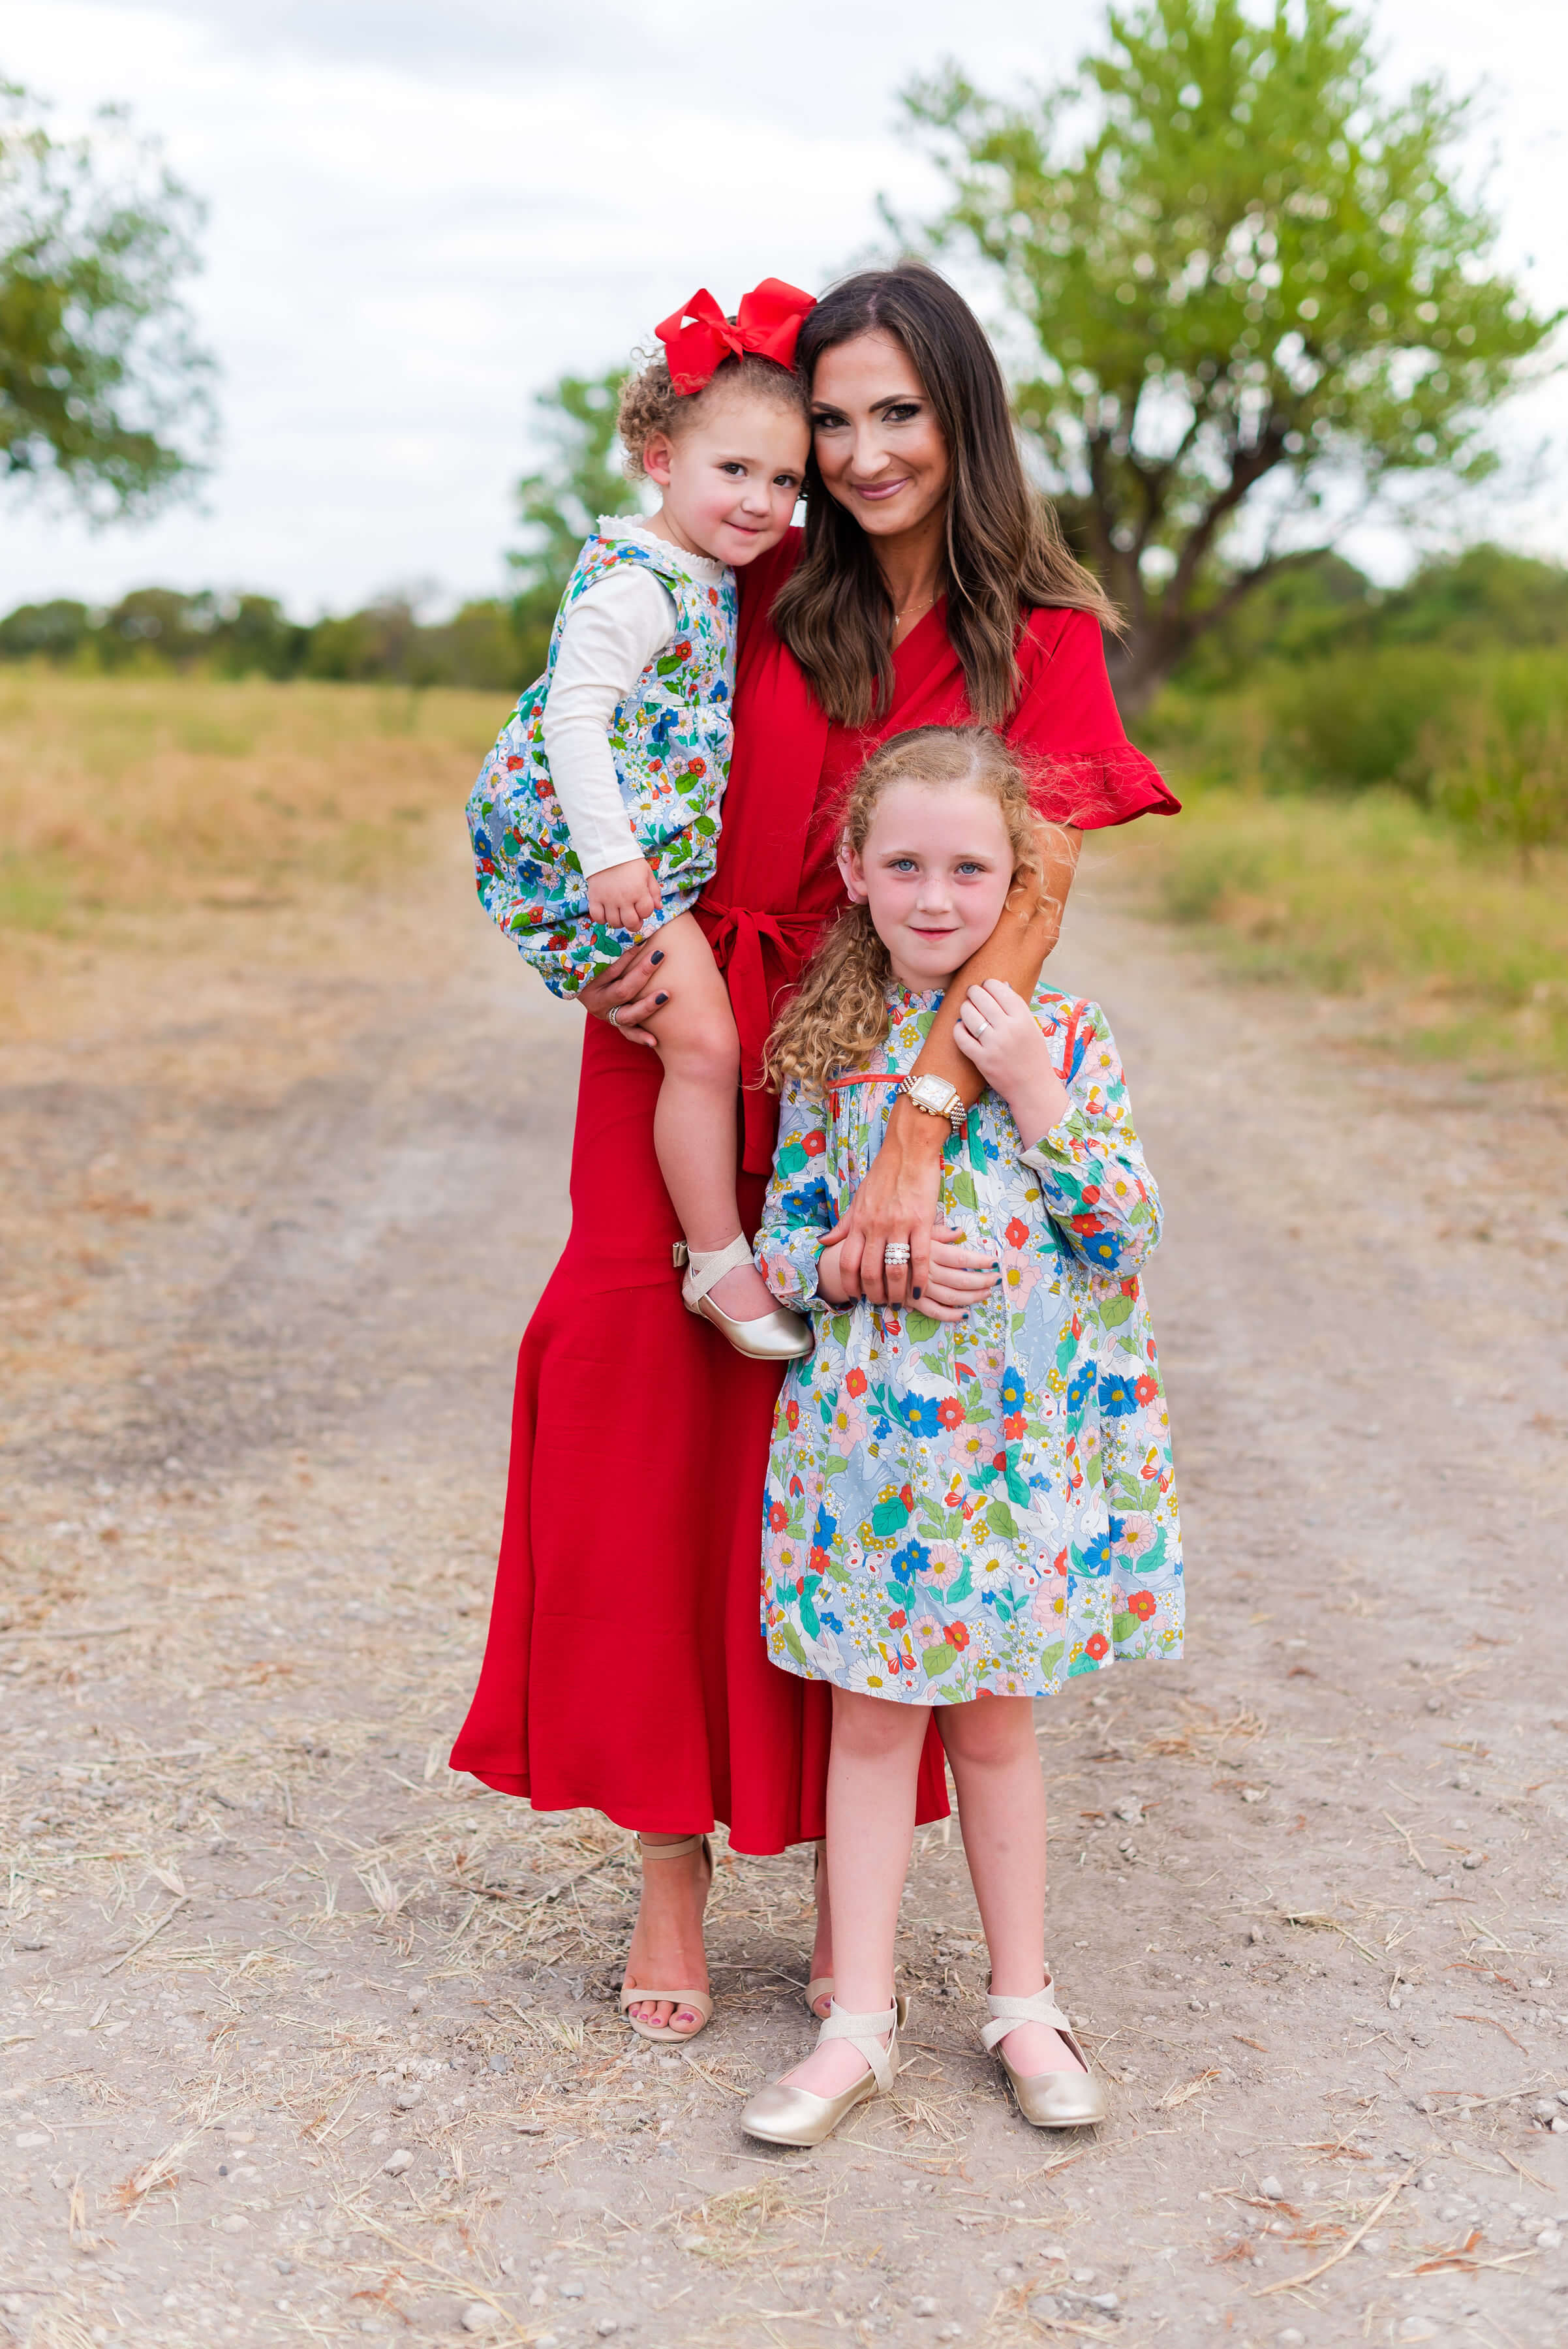 mommy and me photos | Fall family photo Ideas | Style Your Senses